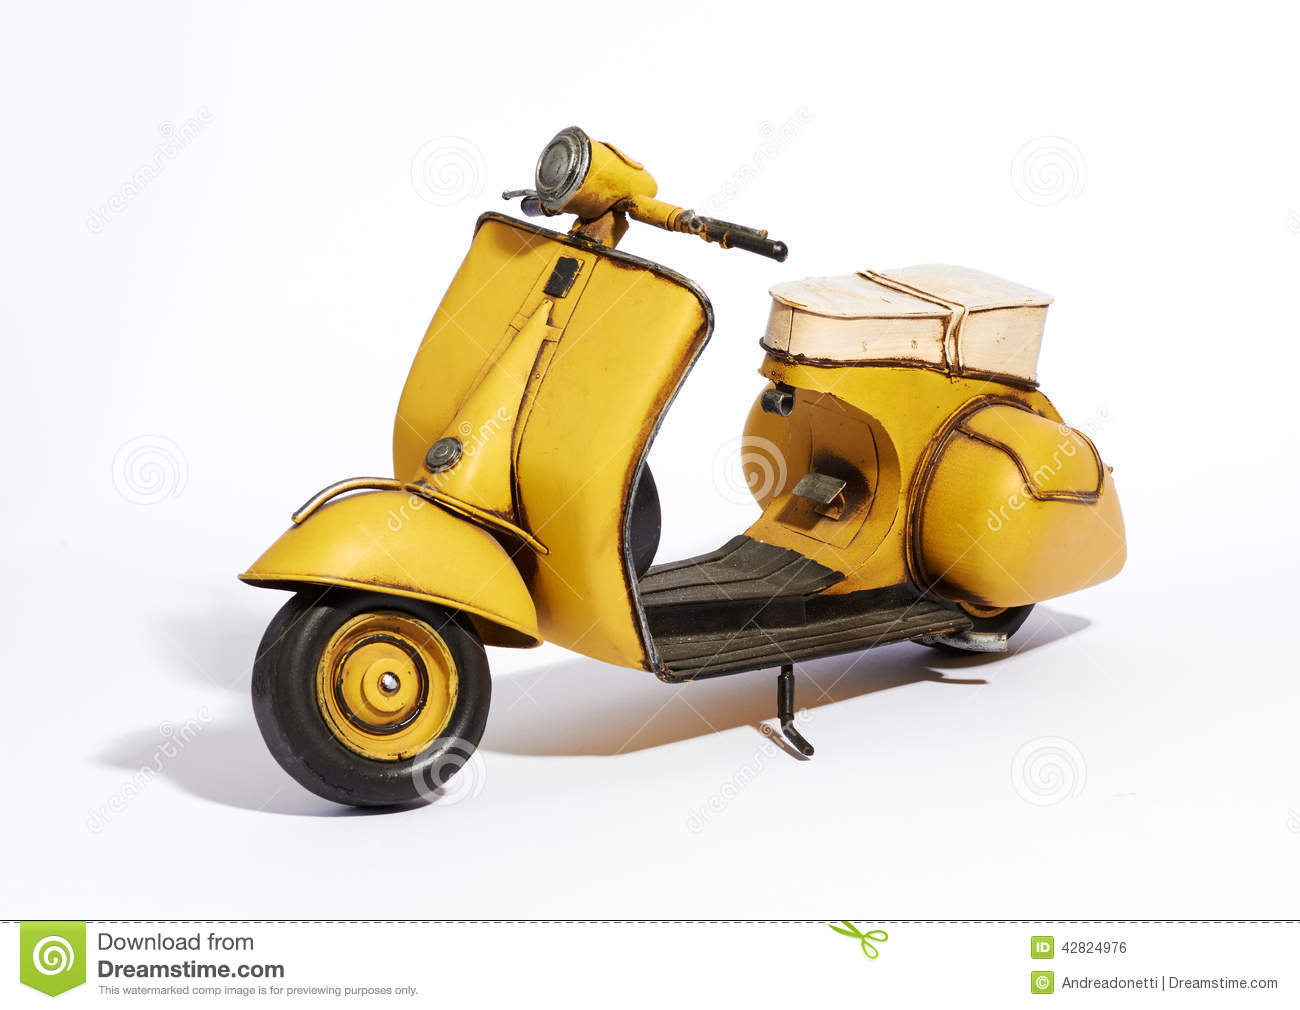 Old Classic Vintage Yellow Motor Scooter With A Wide Footboard And